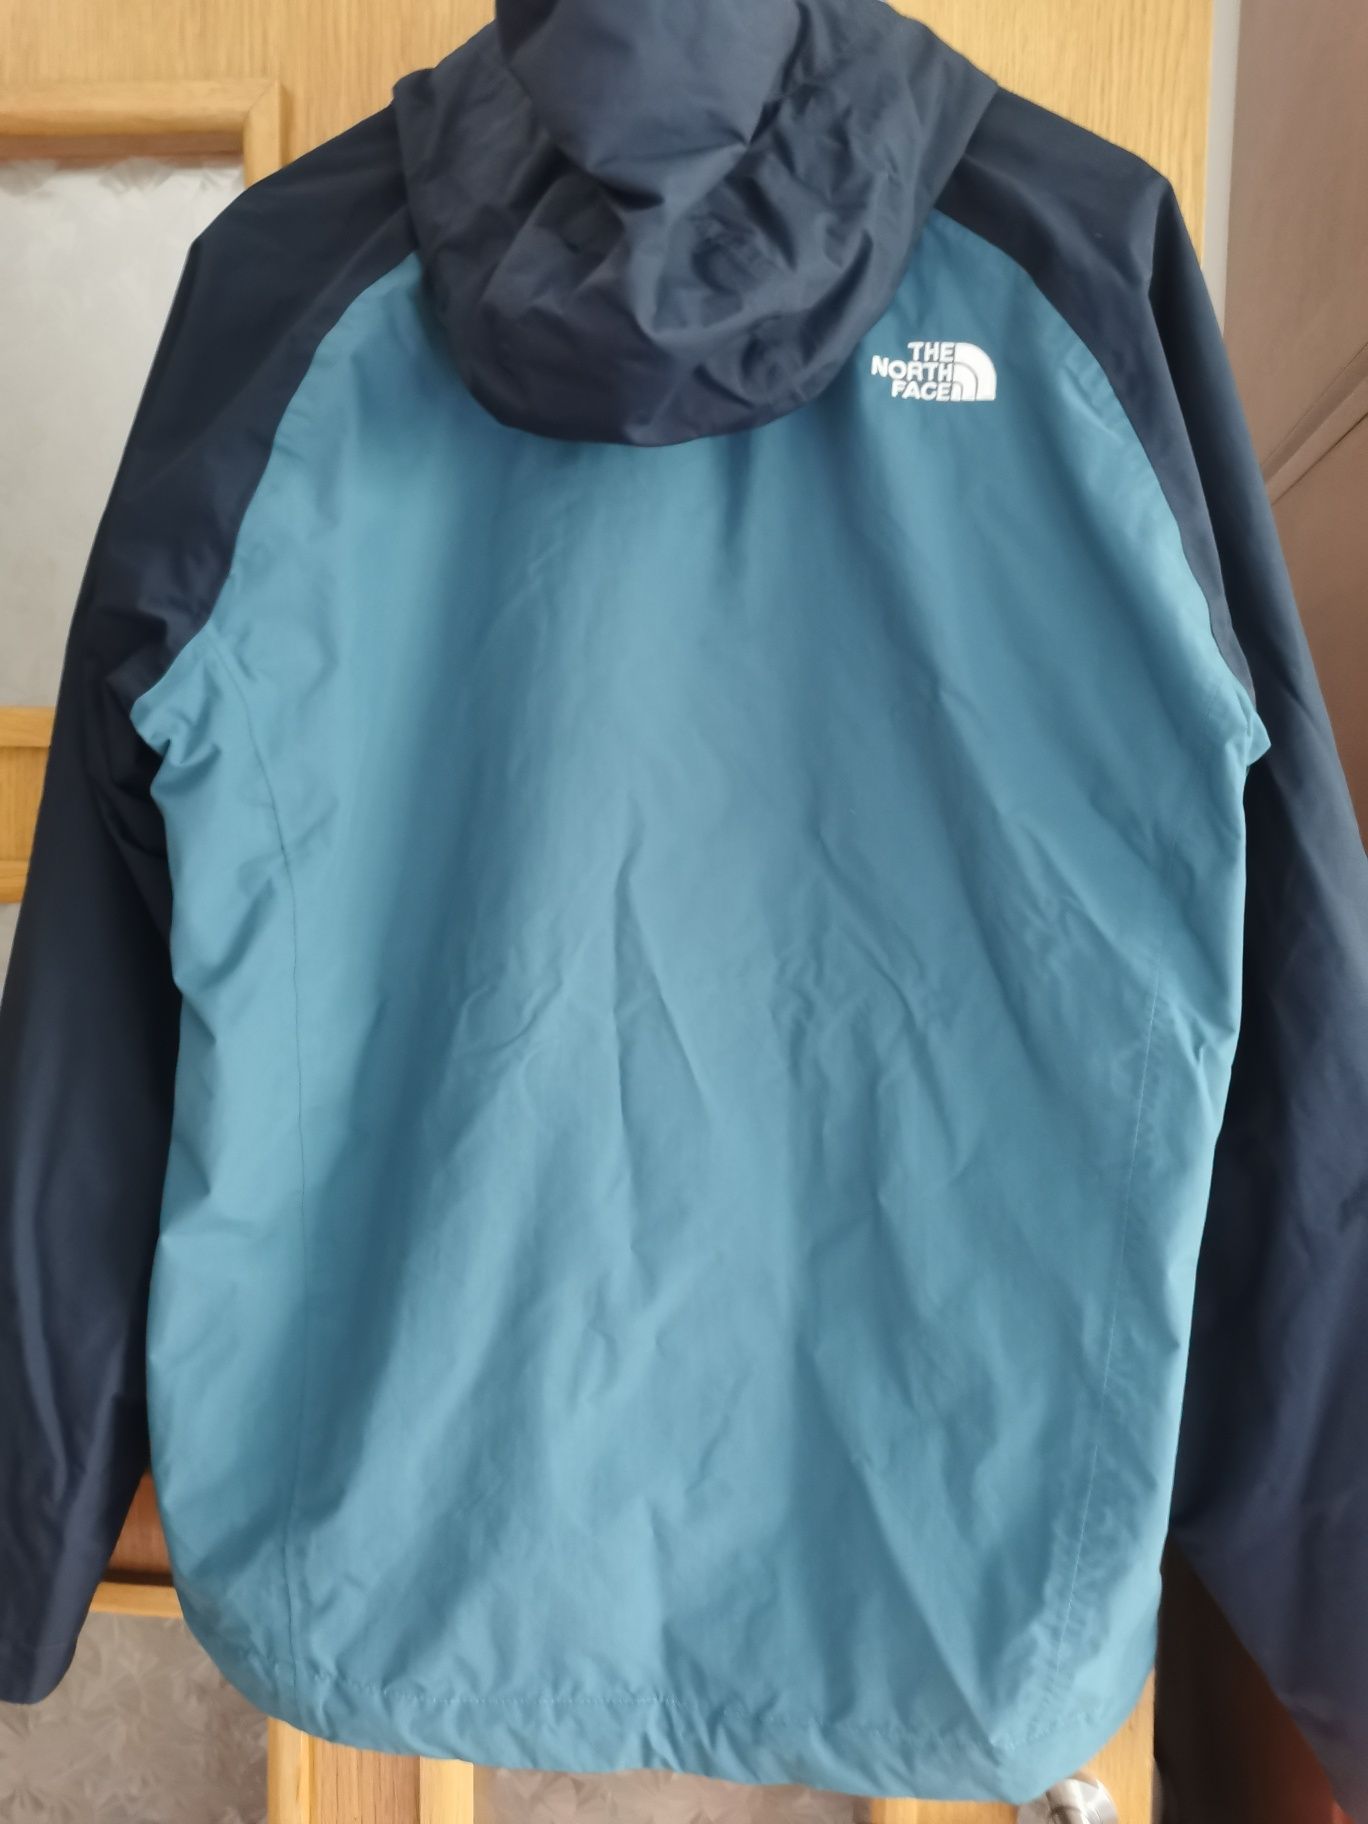 The  North Face Stratos M regular fit